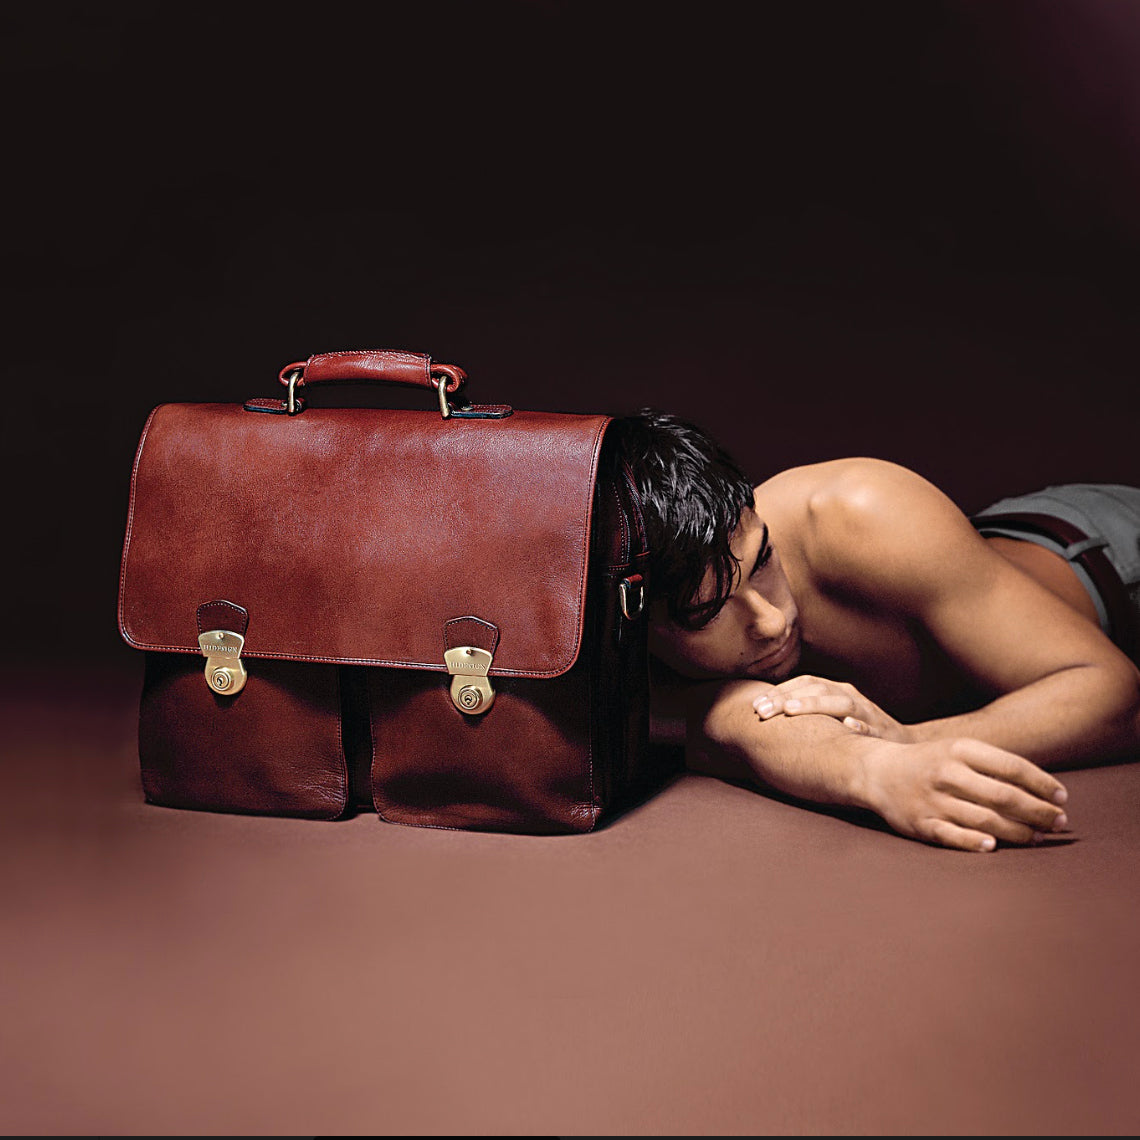 Leather Accessories, Hidesign, Leather Bags For Men